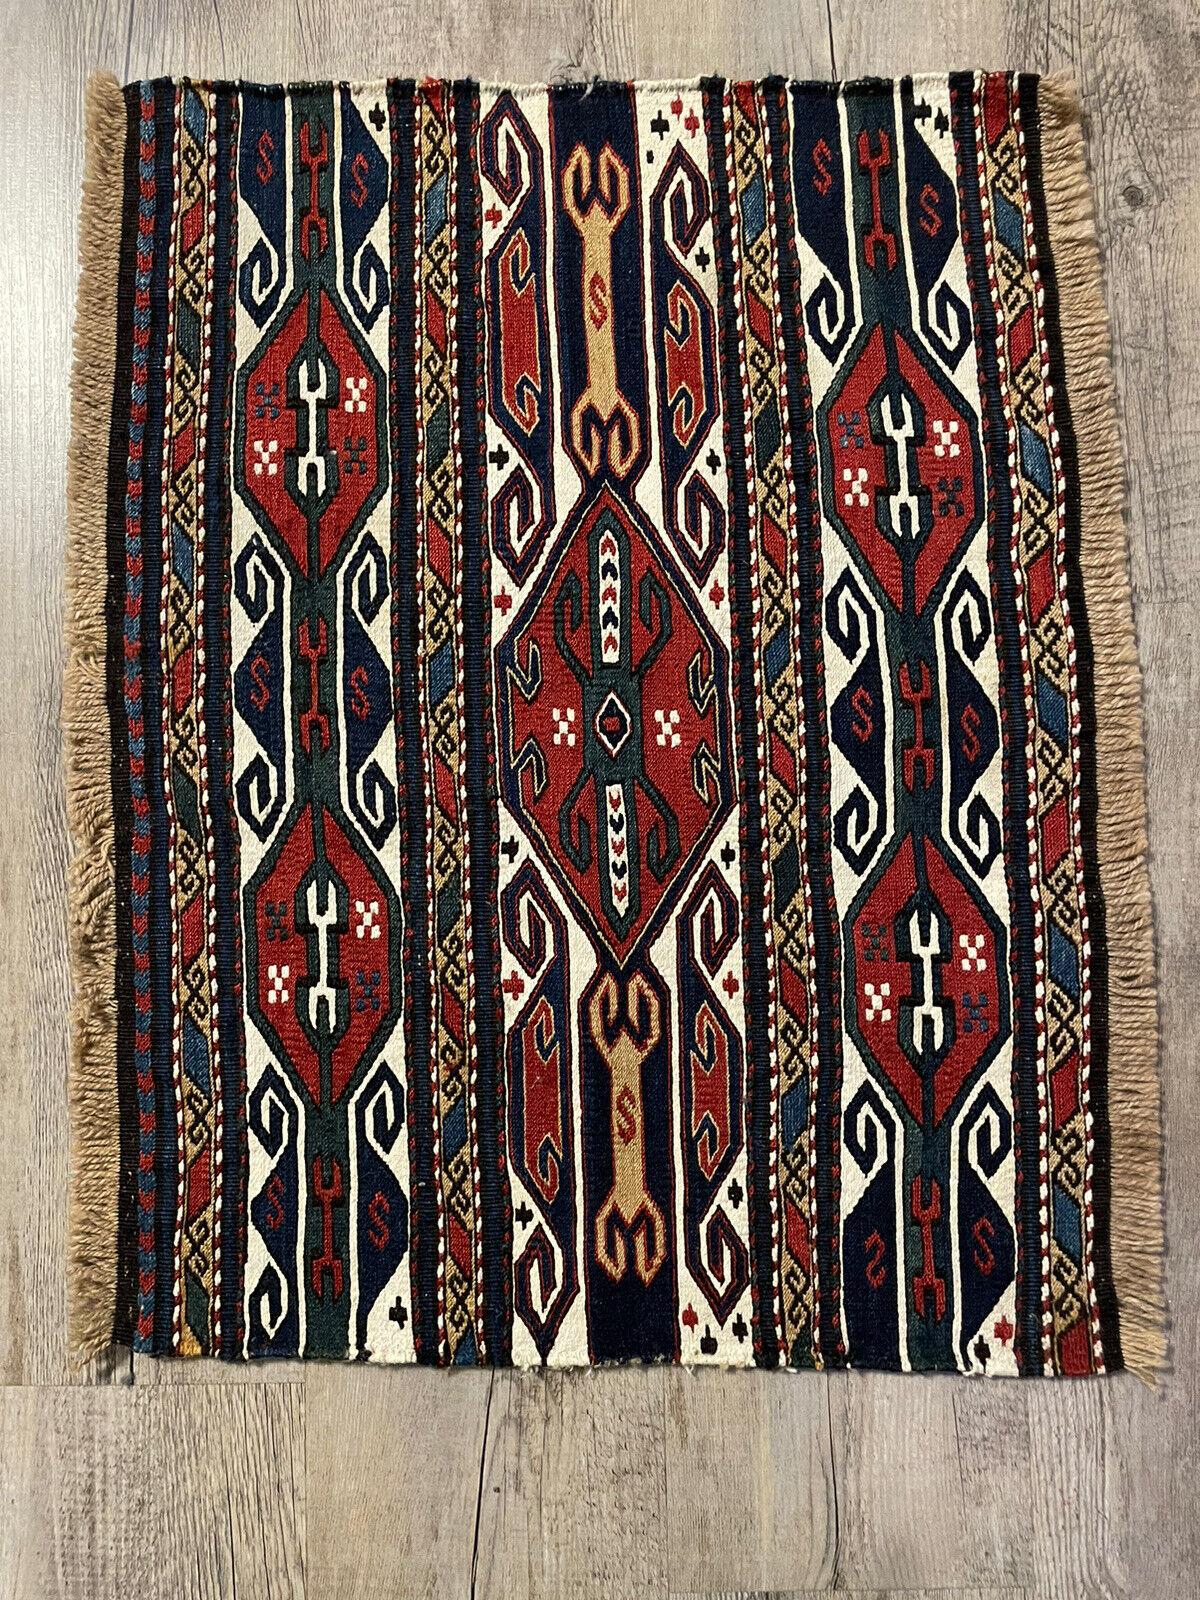 Handmade Antique Persian Style Sumak Collectible Kilim 1.3' x 1.8, 1900s - 1N04 For Sale 6